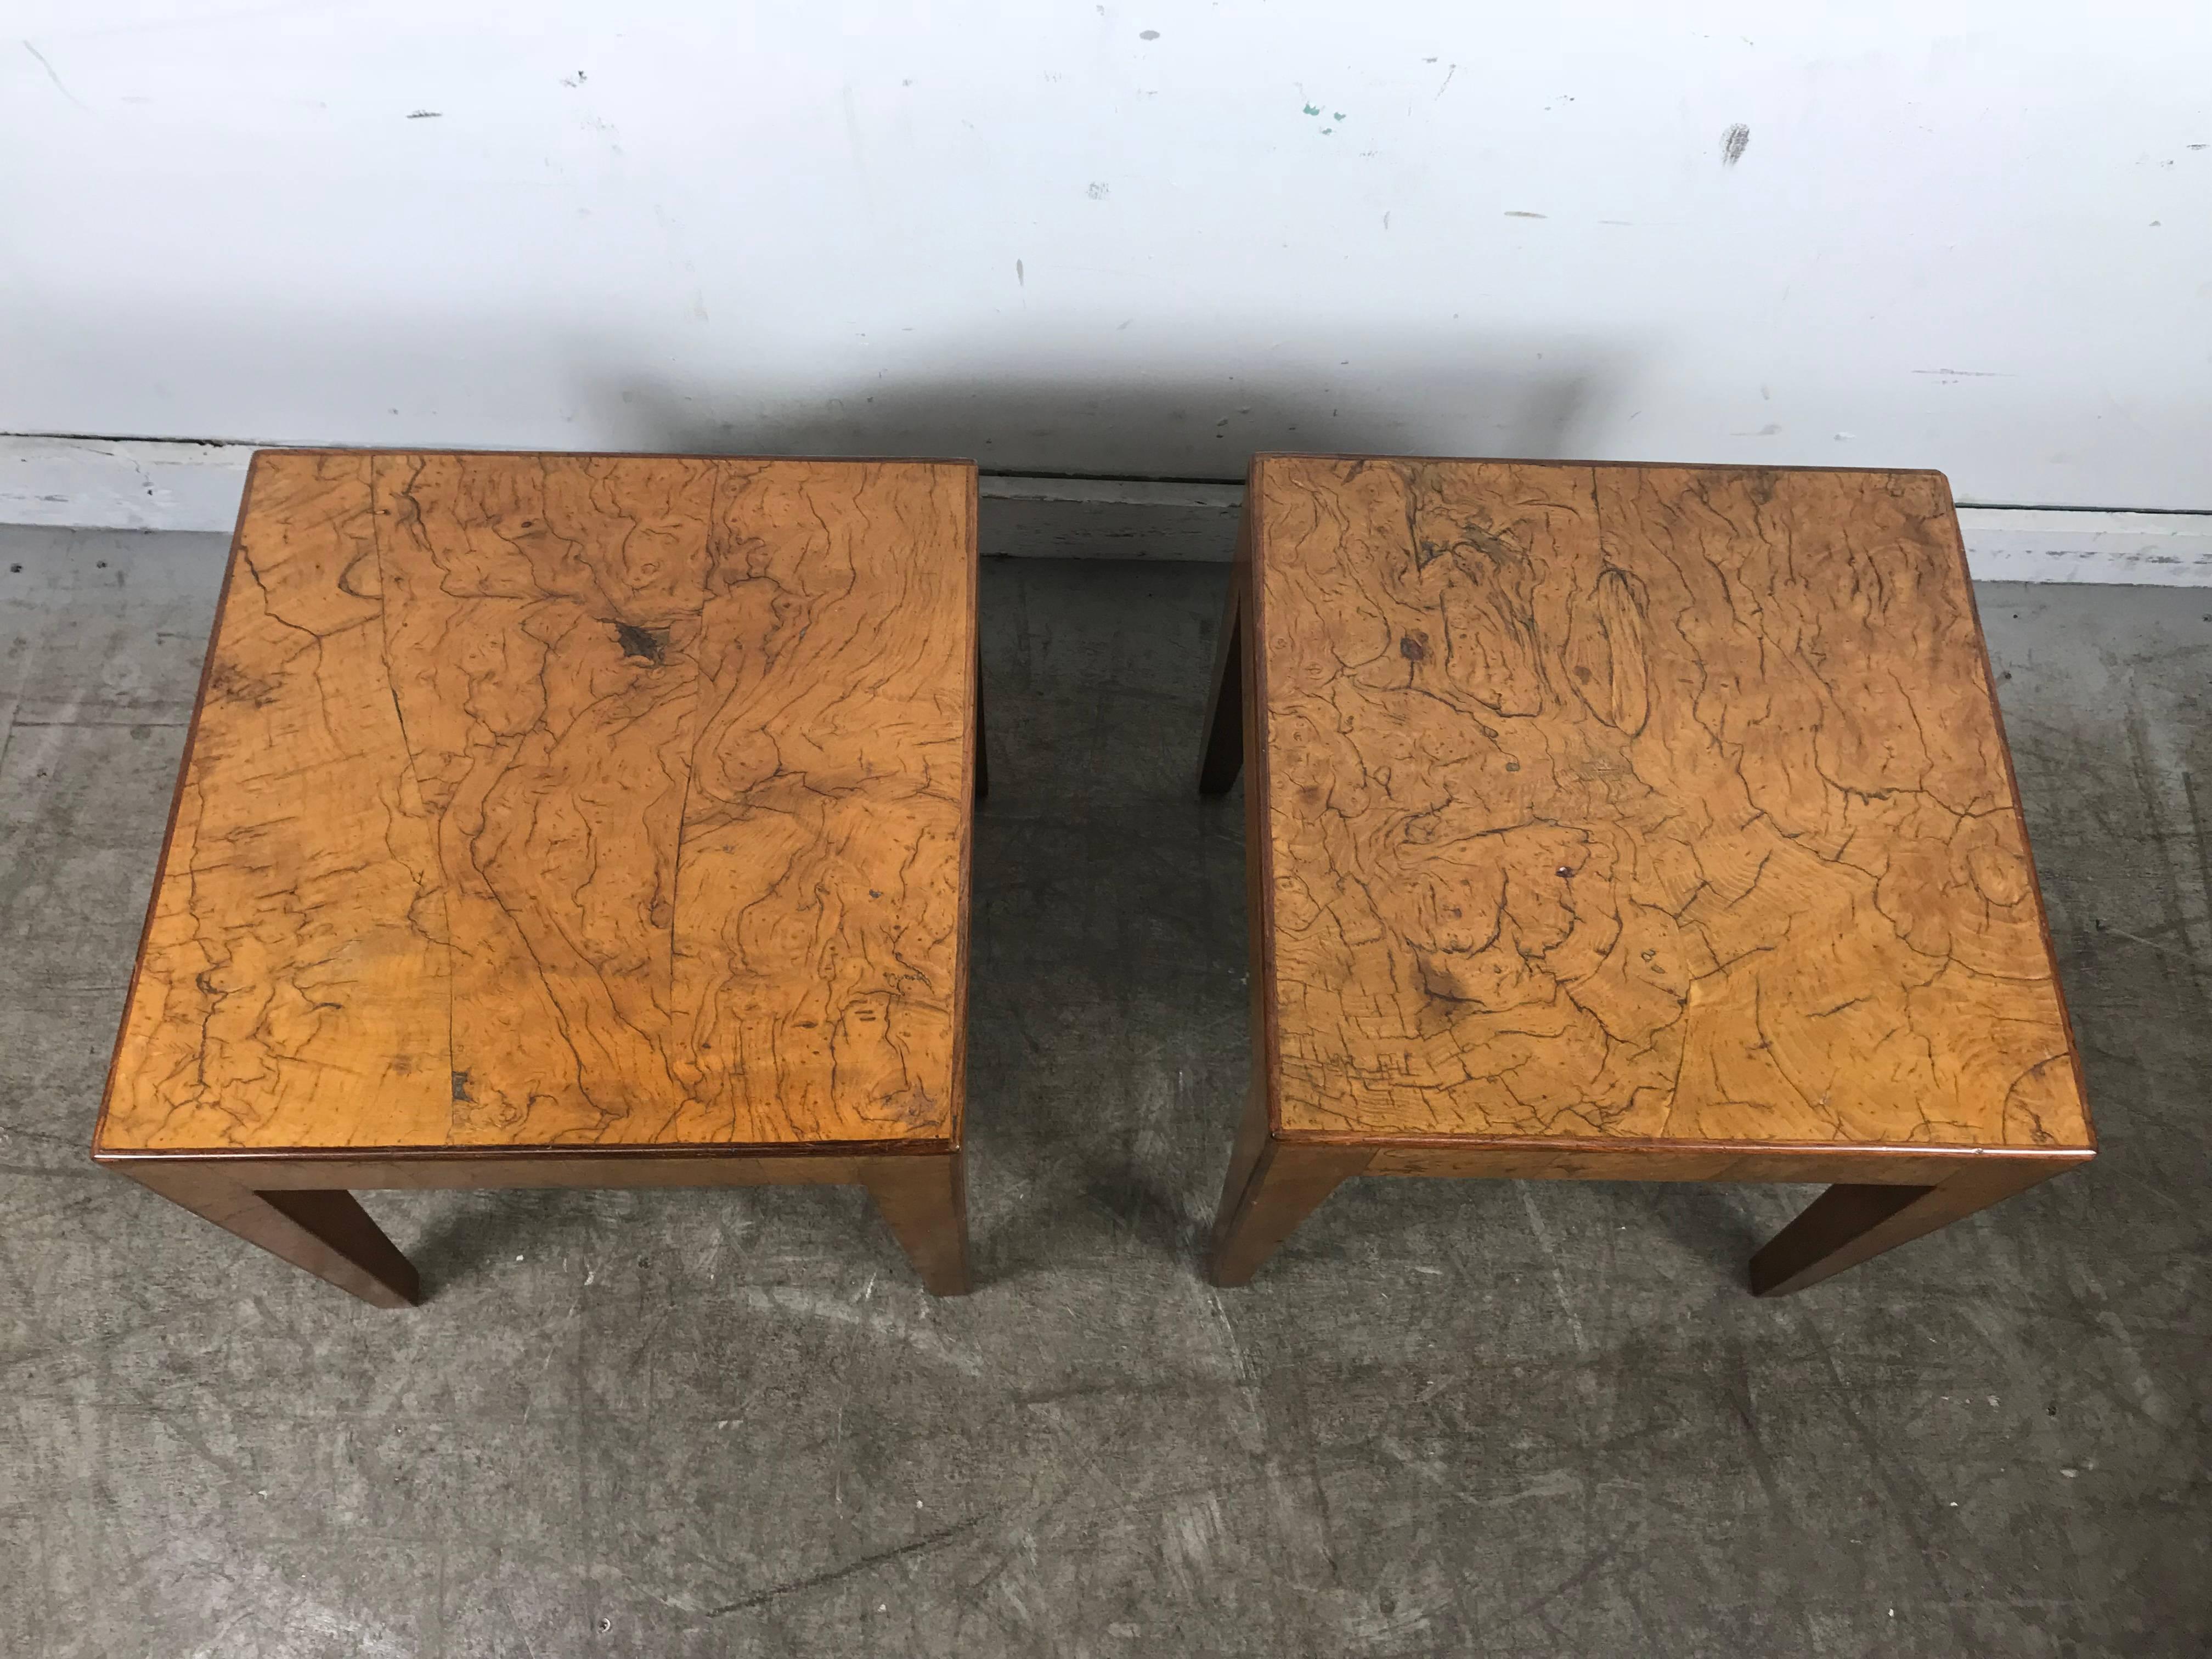 Mid-20th Century Pair of Elm Burl Wood Italian Modernist Tables 1940s after Willy Rizzo